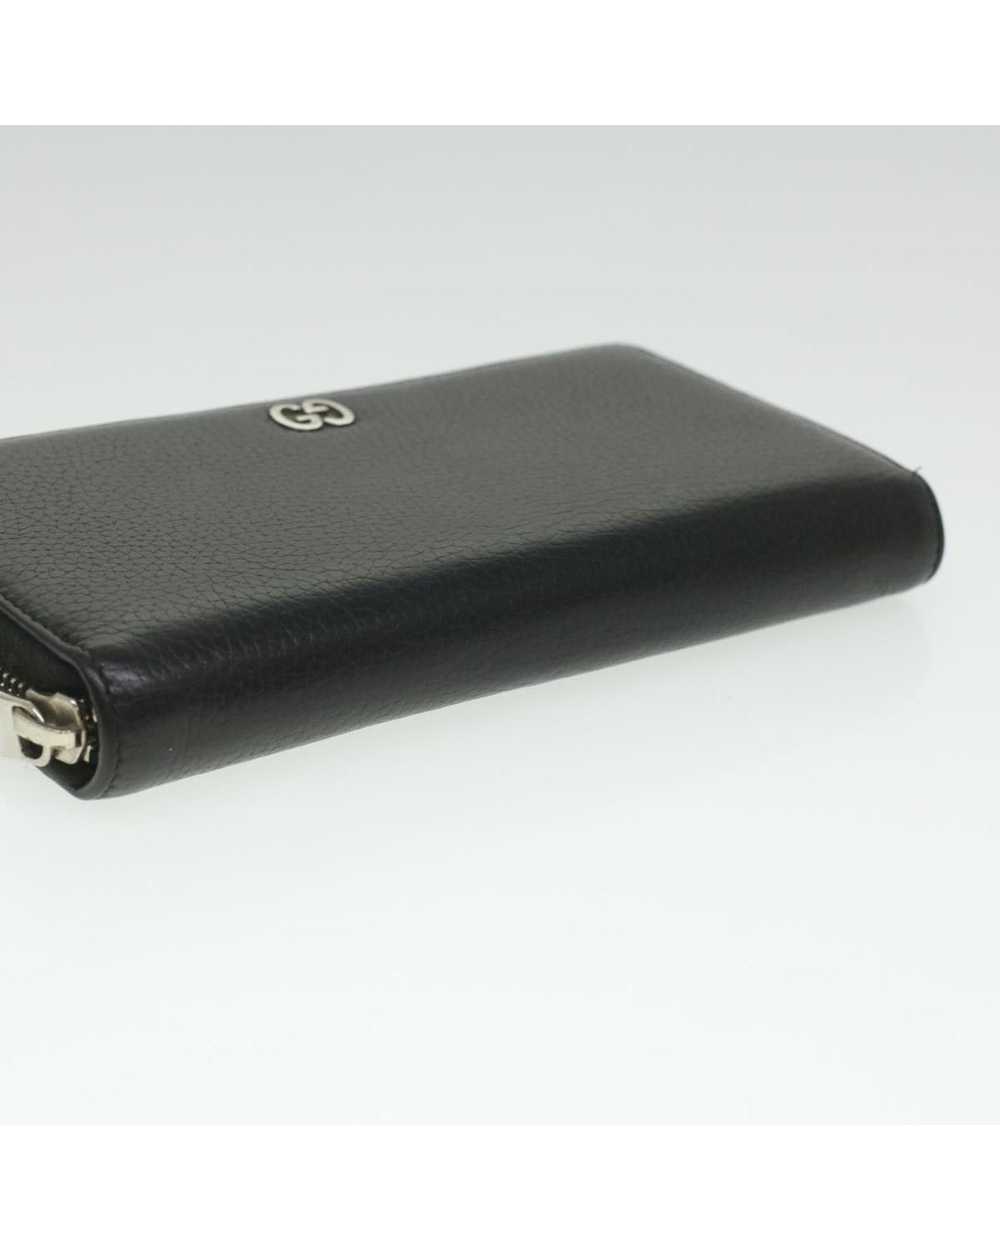 Gucci Black Leather Long Wallet by Gucci 473928 - image 5